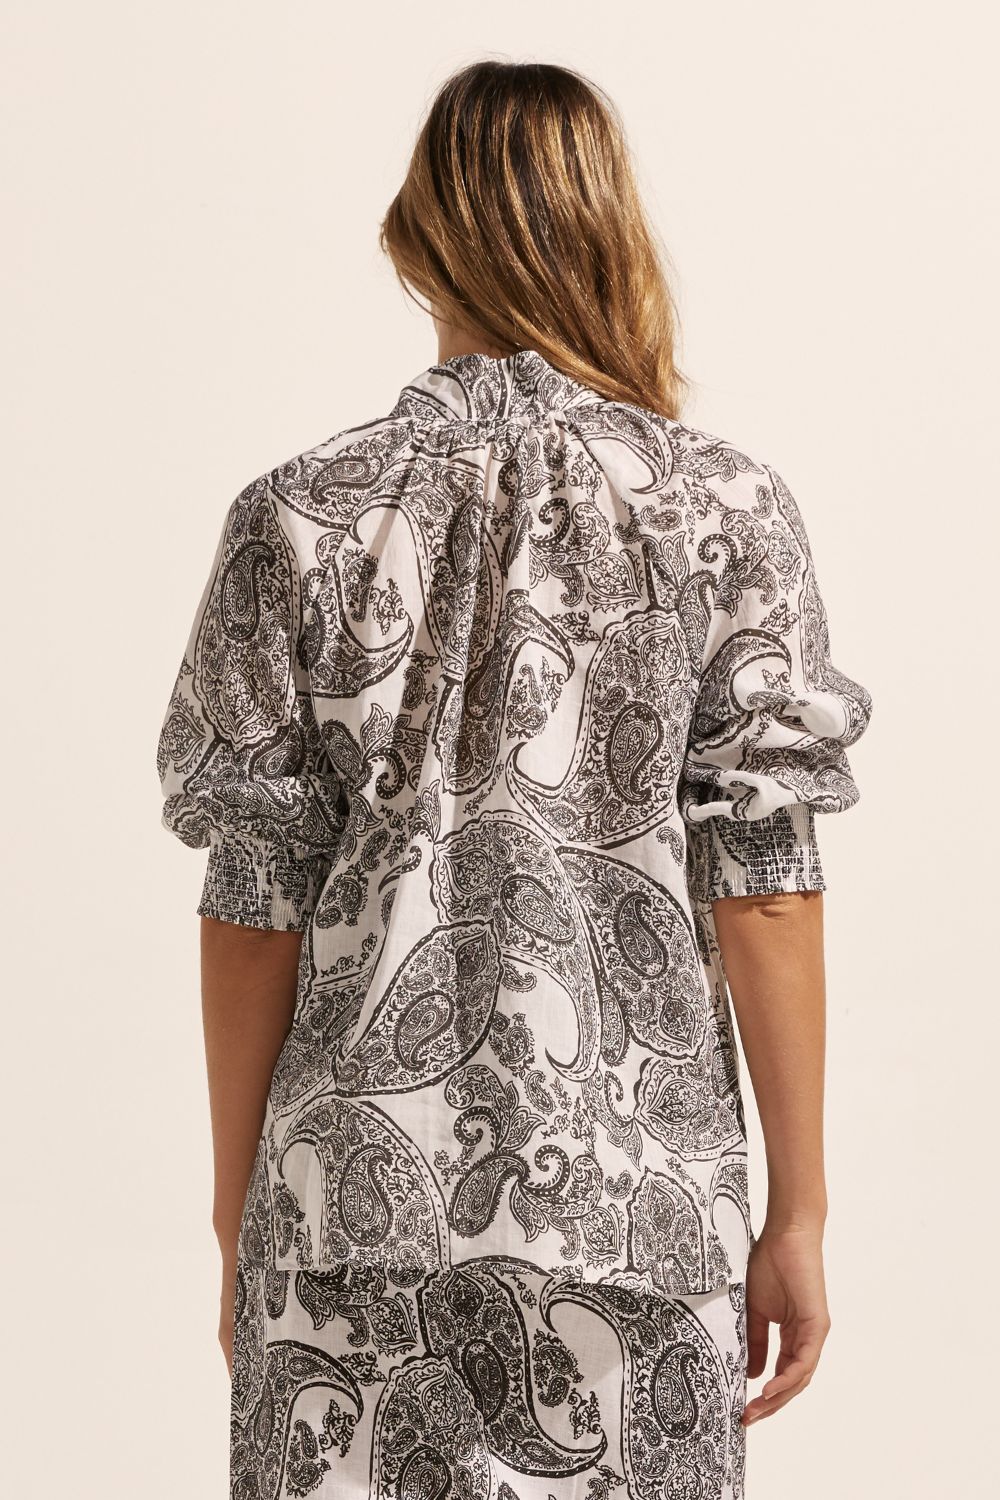 black and white print, high neck, button up, top, back view